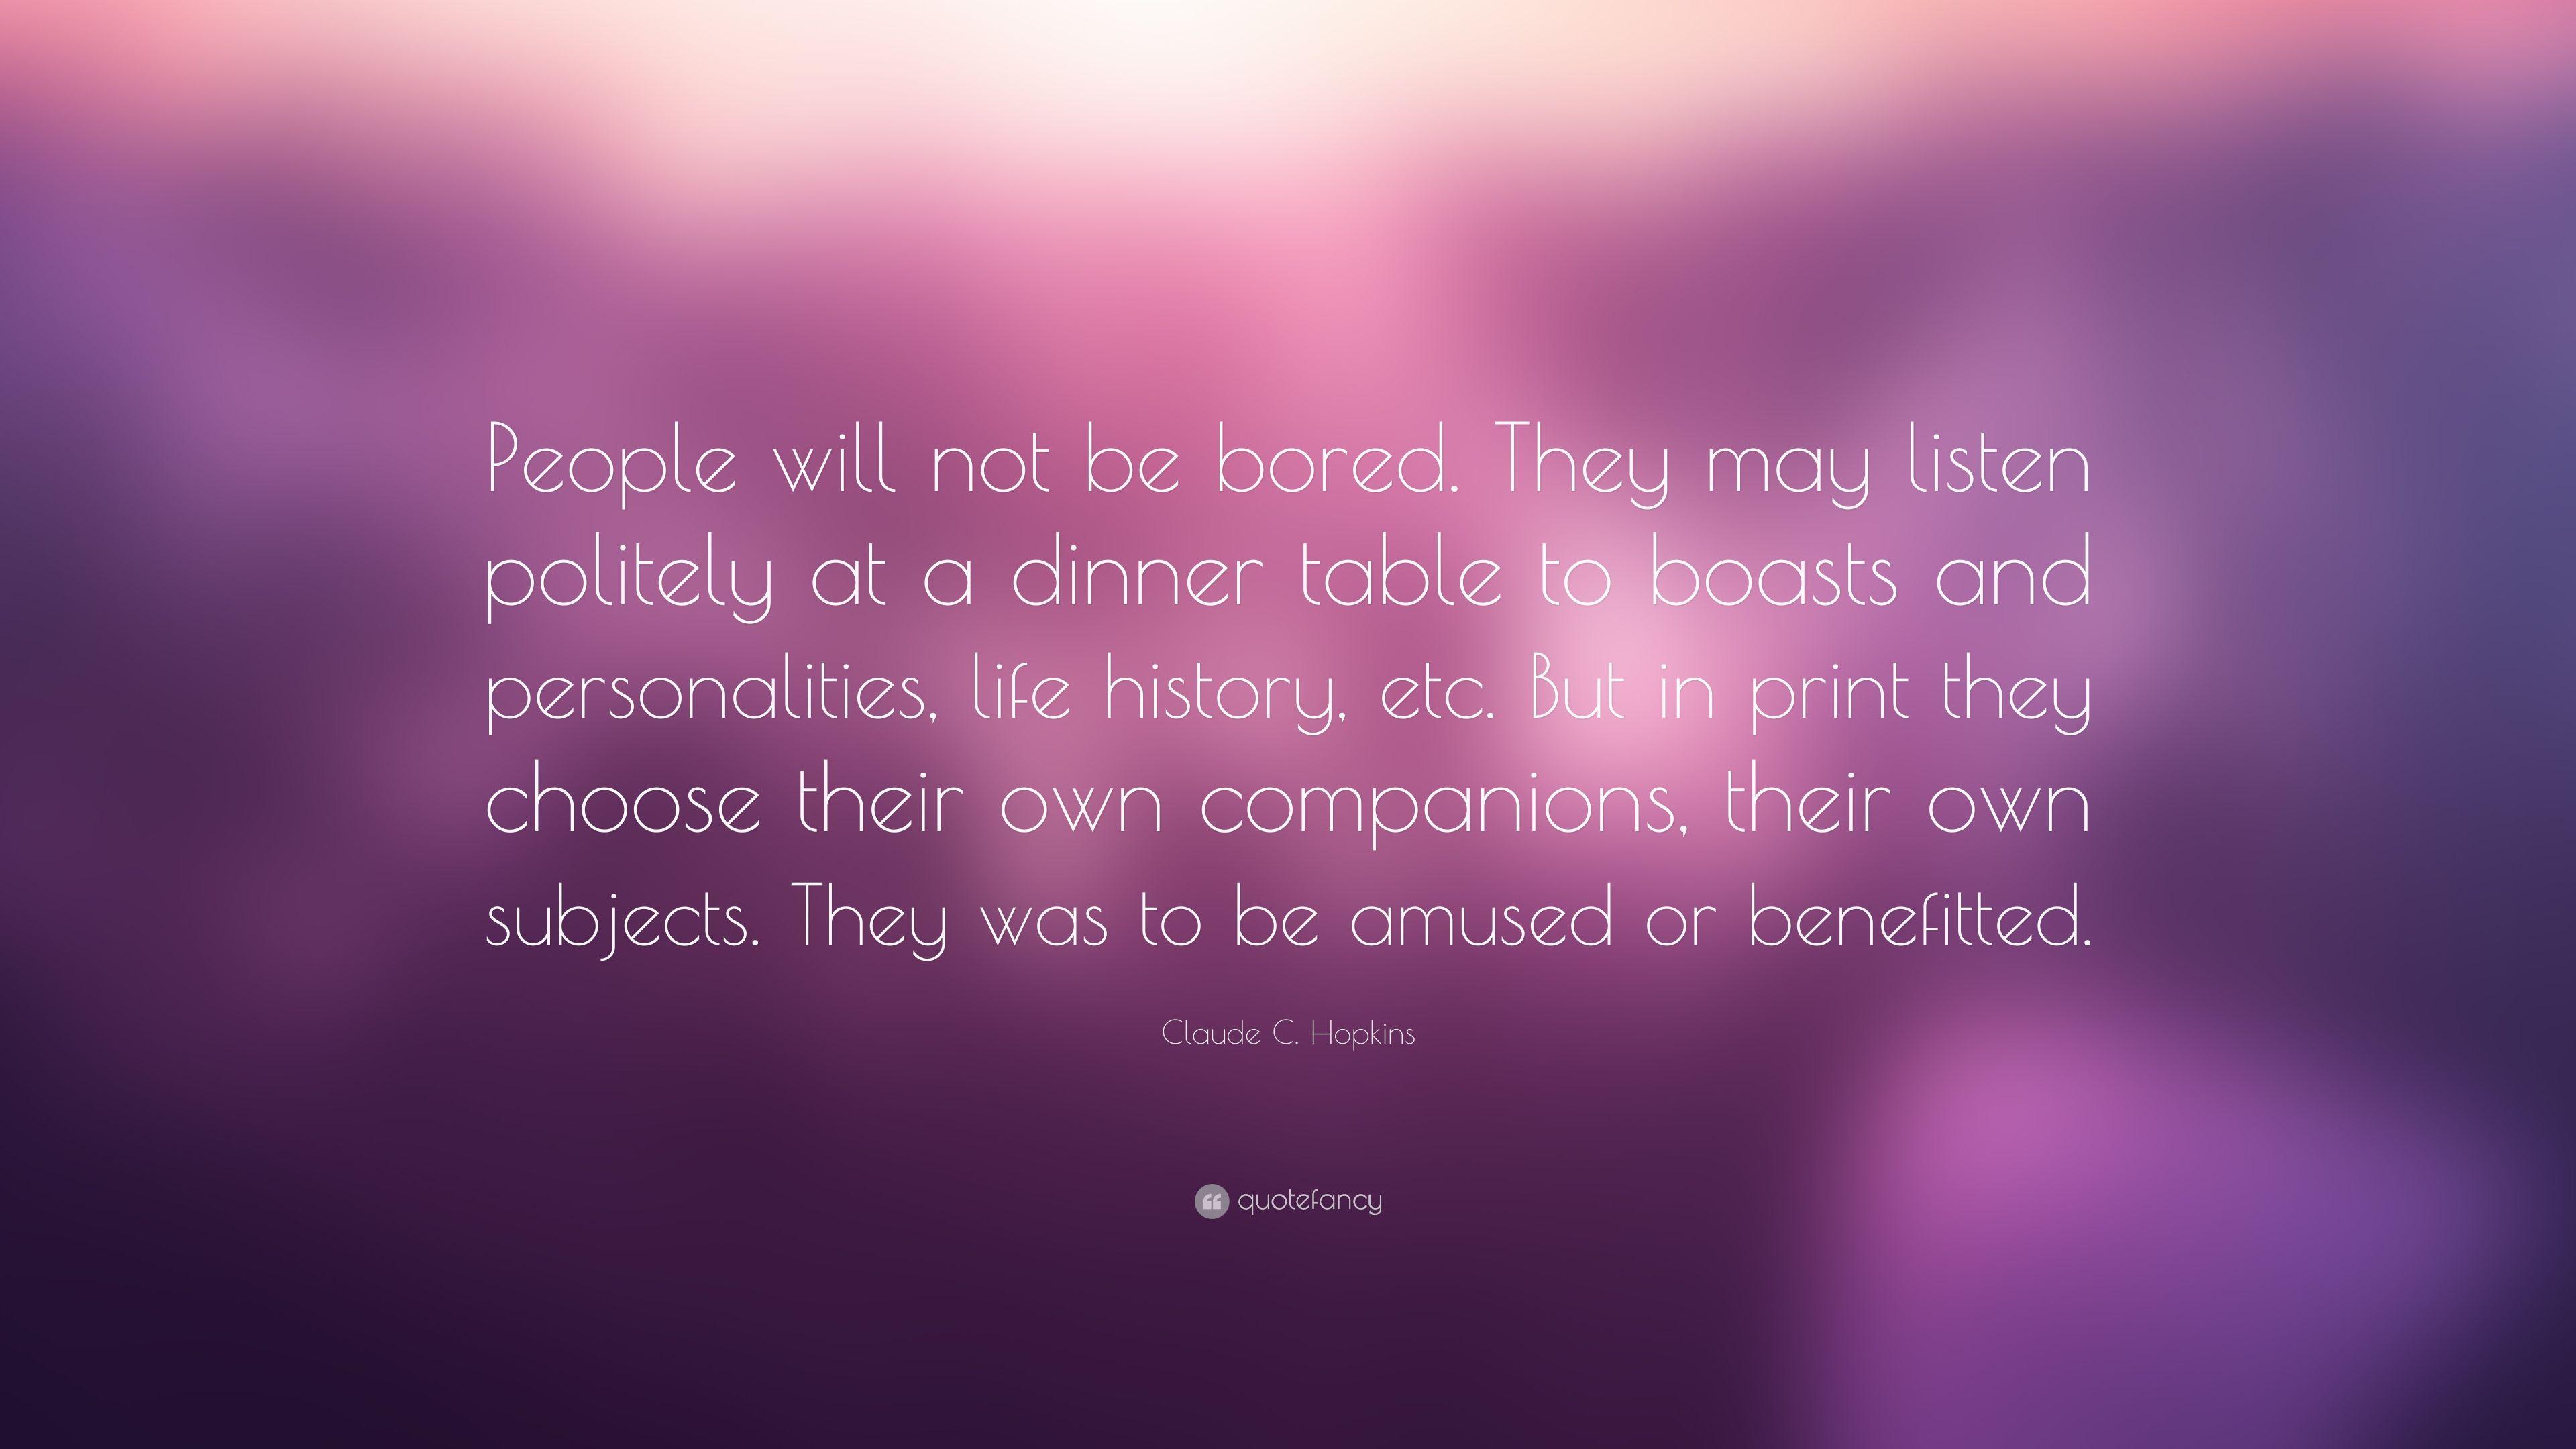 Claude C. Hopkins Quote: “People will not be bored. They may